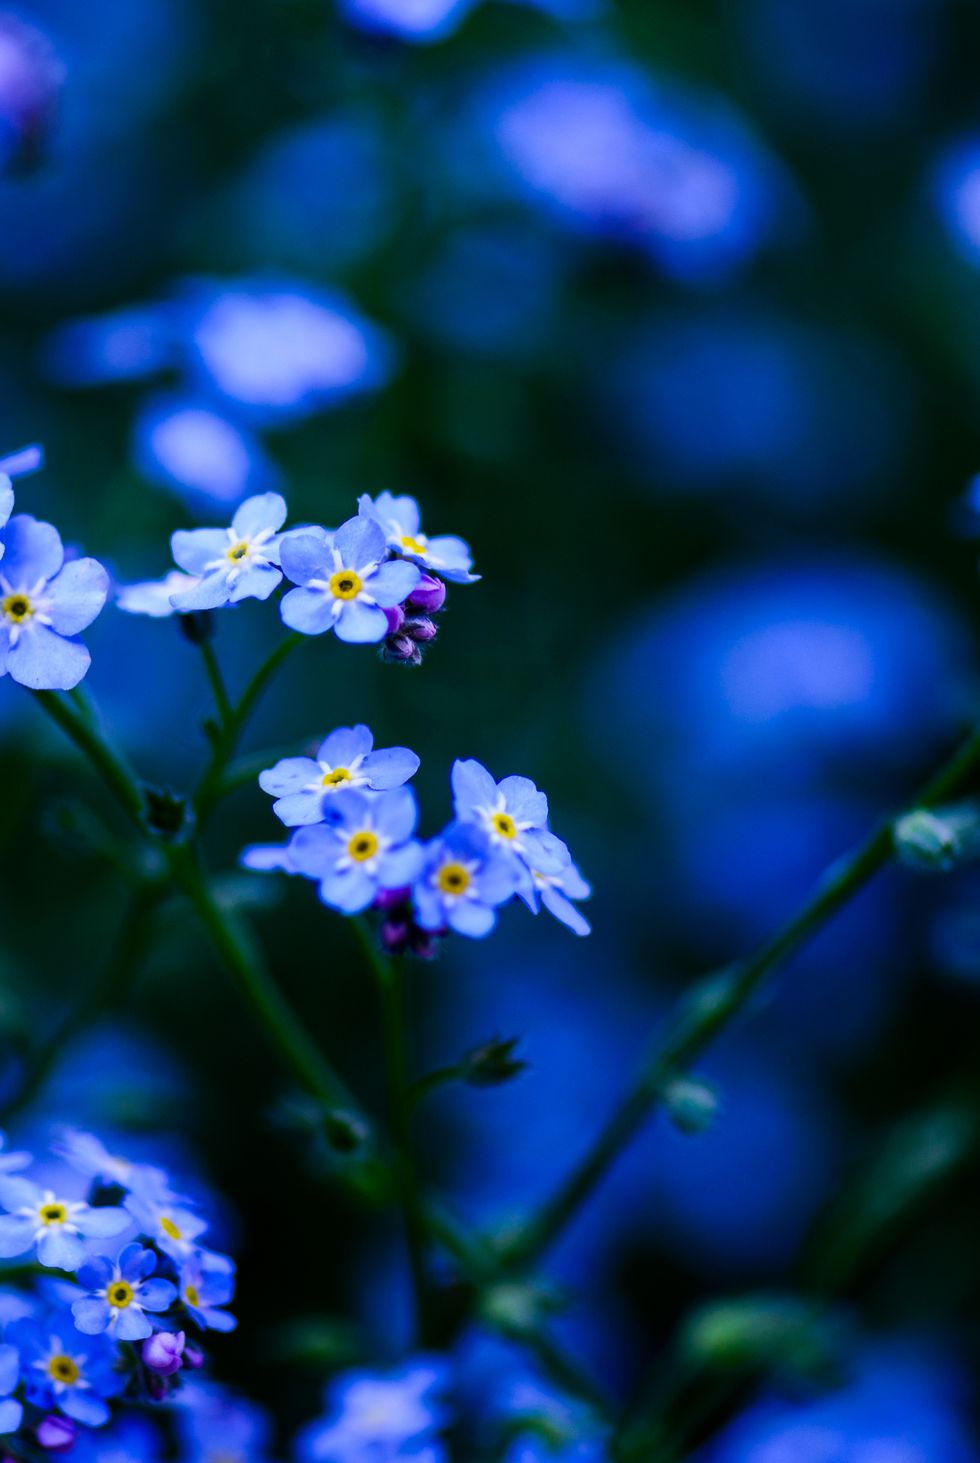 Forget Me Not: Plant Care Tips, Growing Guide, and Symbolism